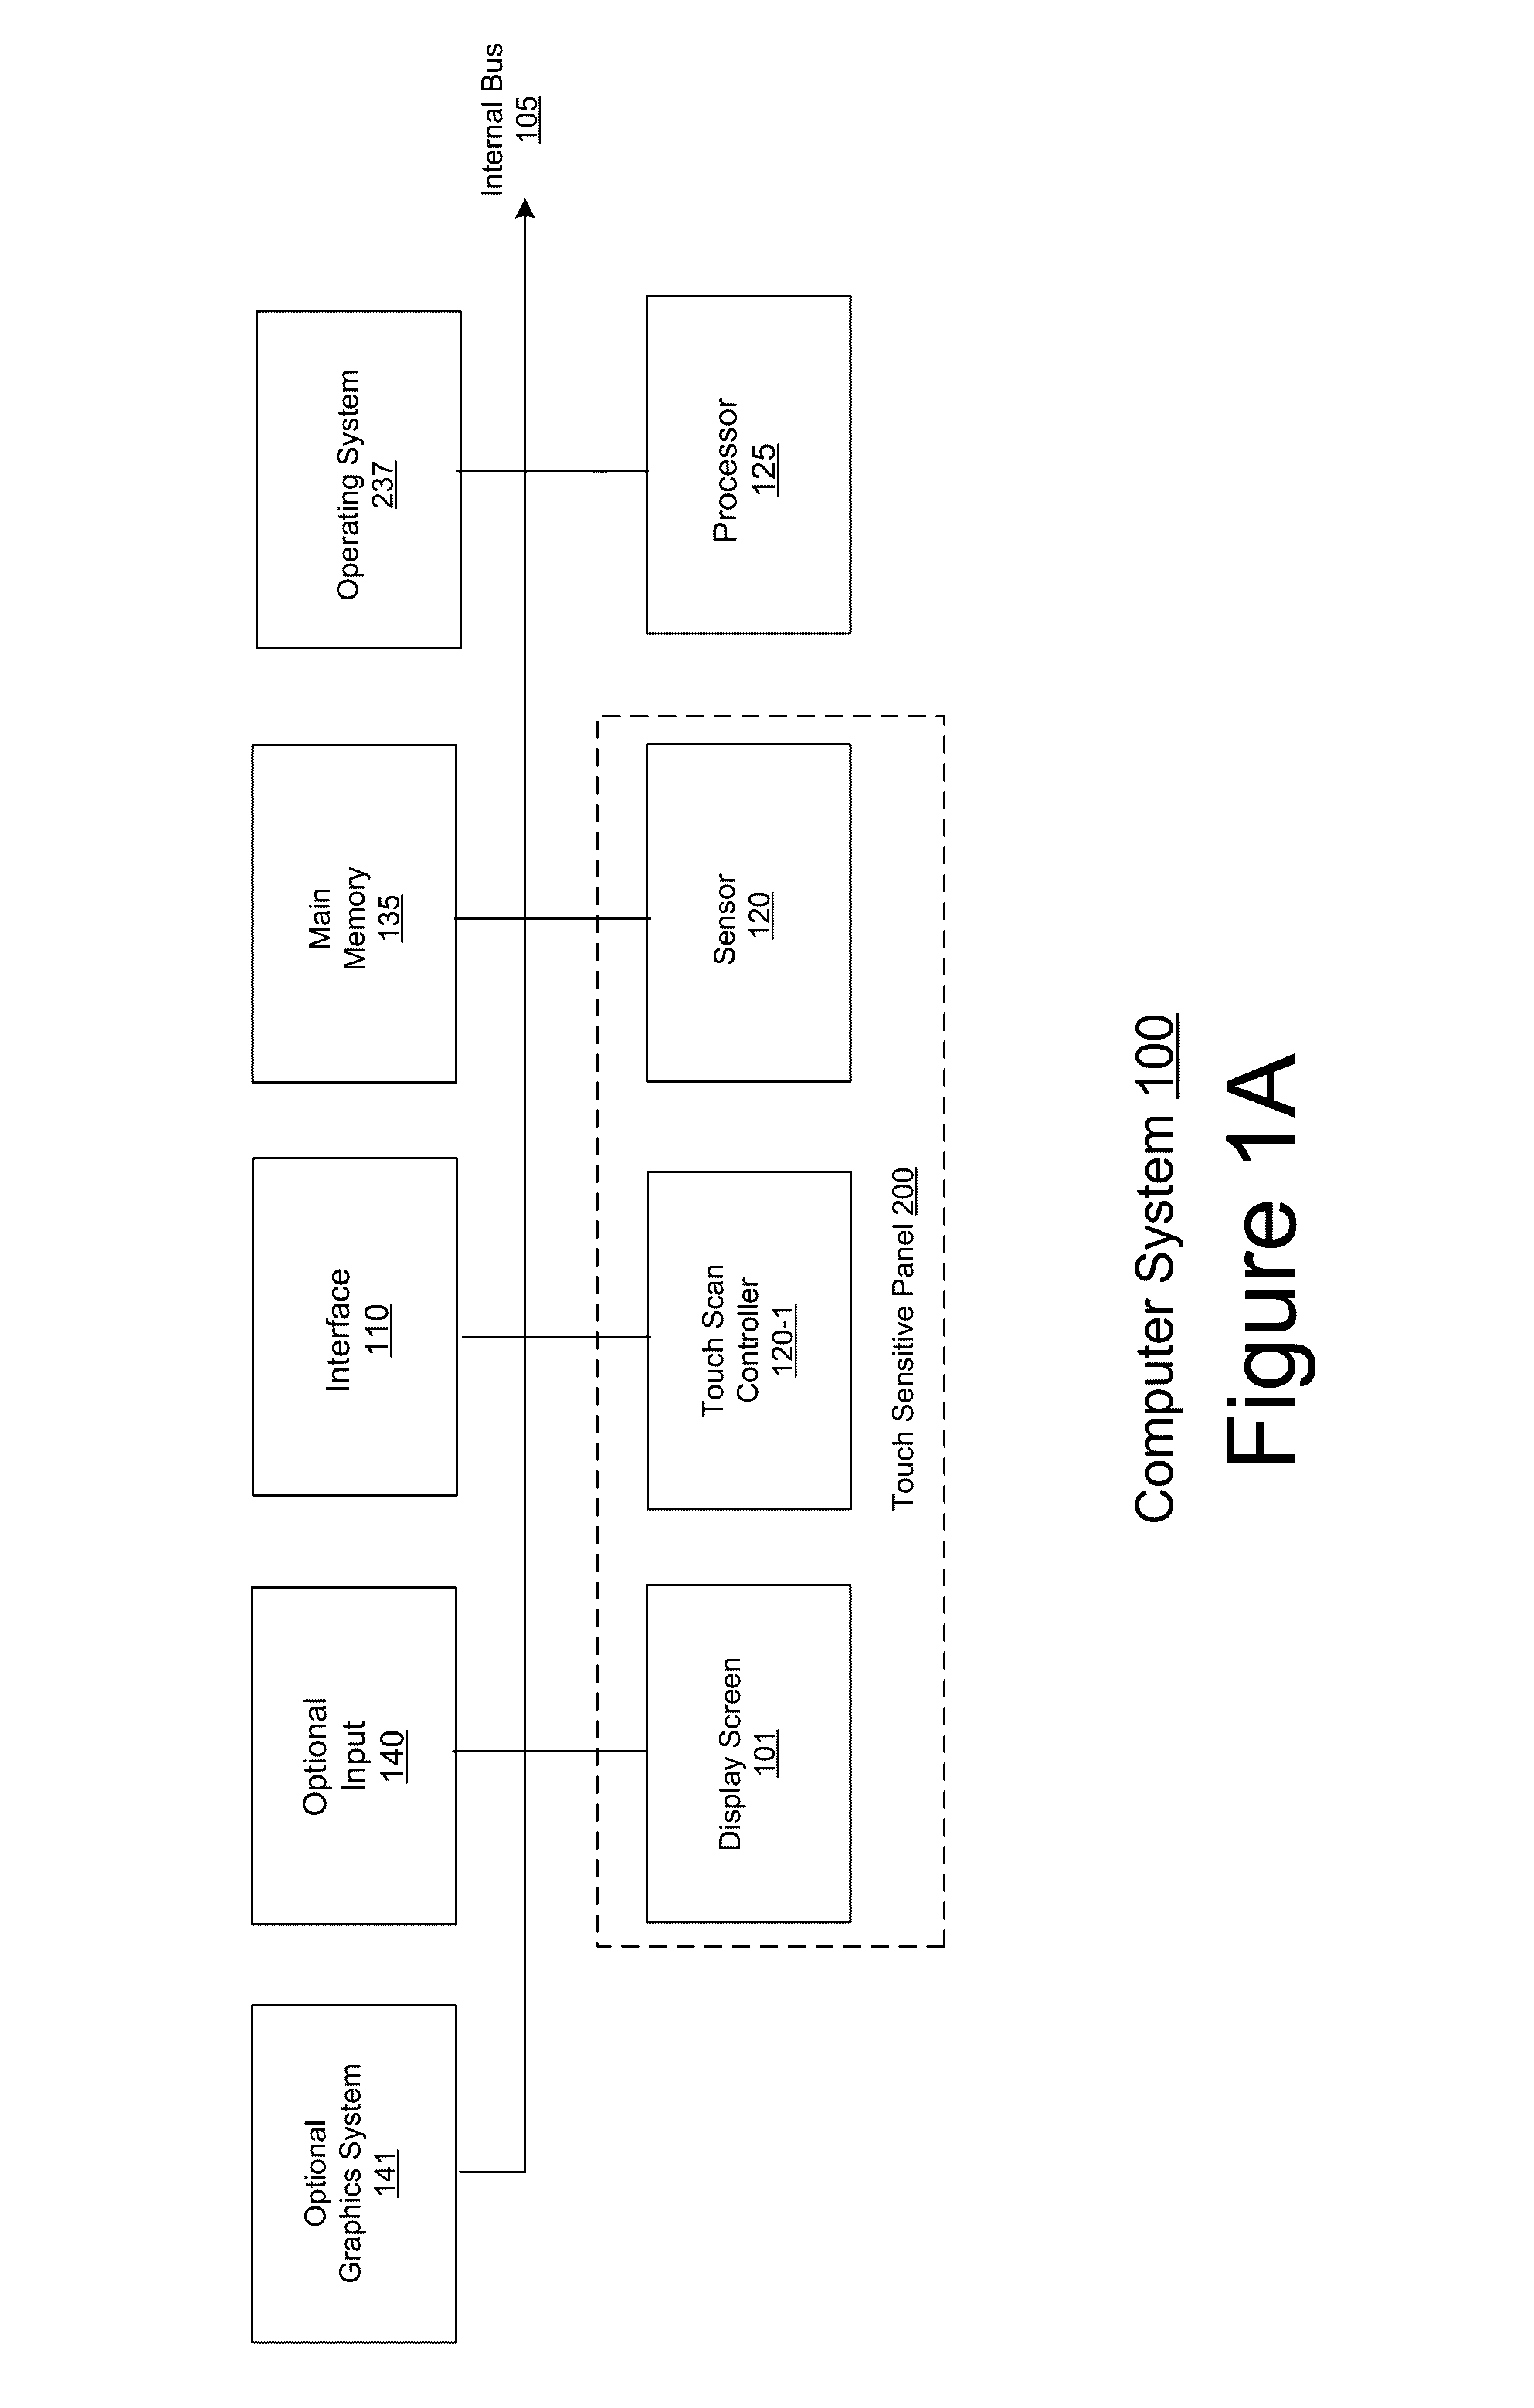 Method and system for reduced power touch input detection on an electronic device using reduced scanning